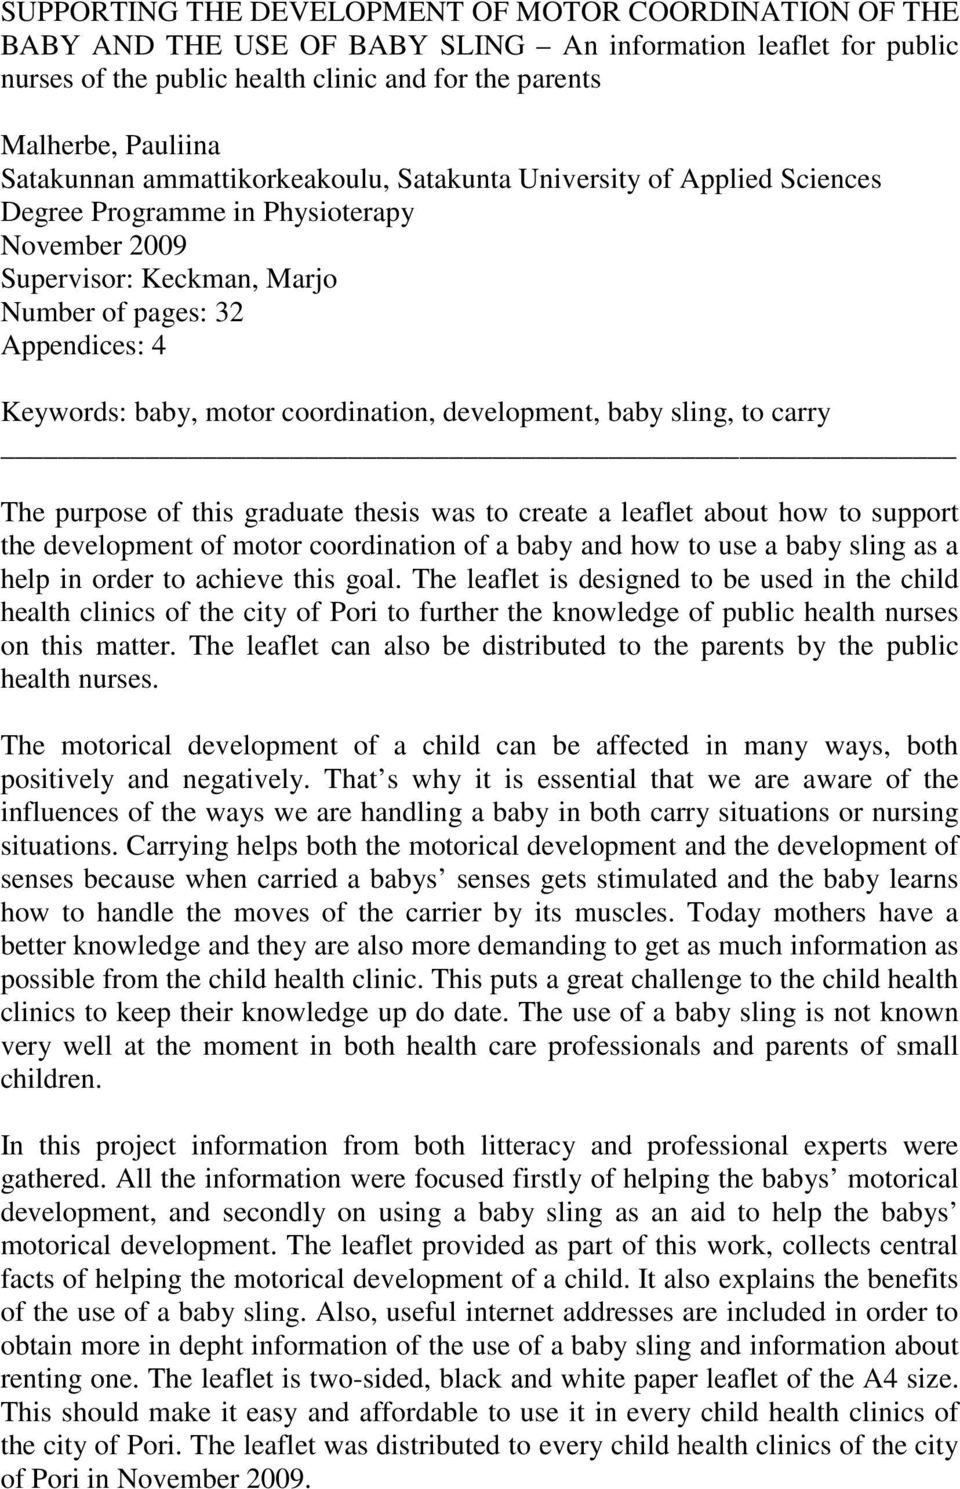 motor coordination, development, baby sling, to carry The purpose of this graduate thesis was to create a leaflet about how to support the development of motor coordination of a baby and how to use a